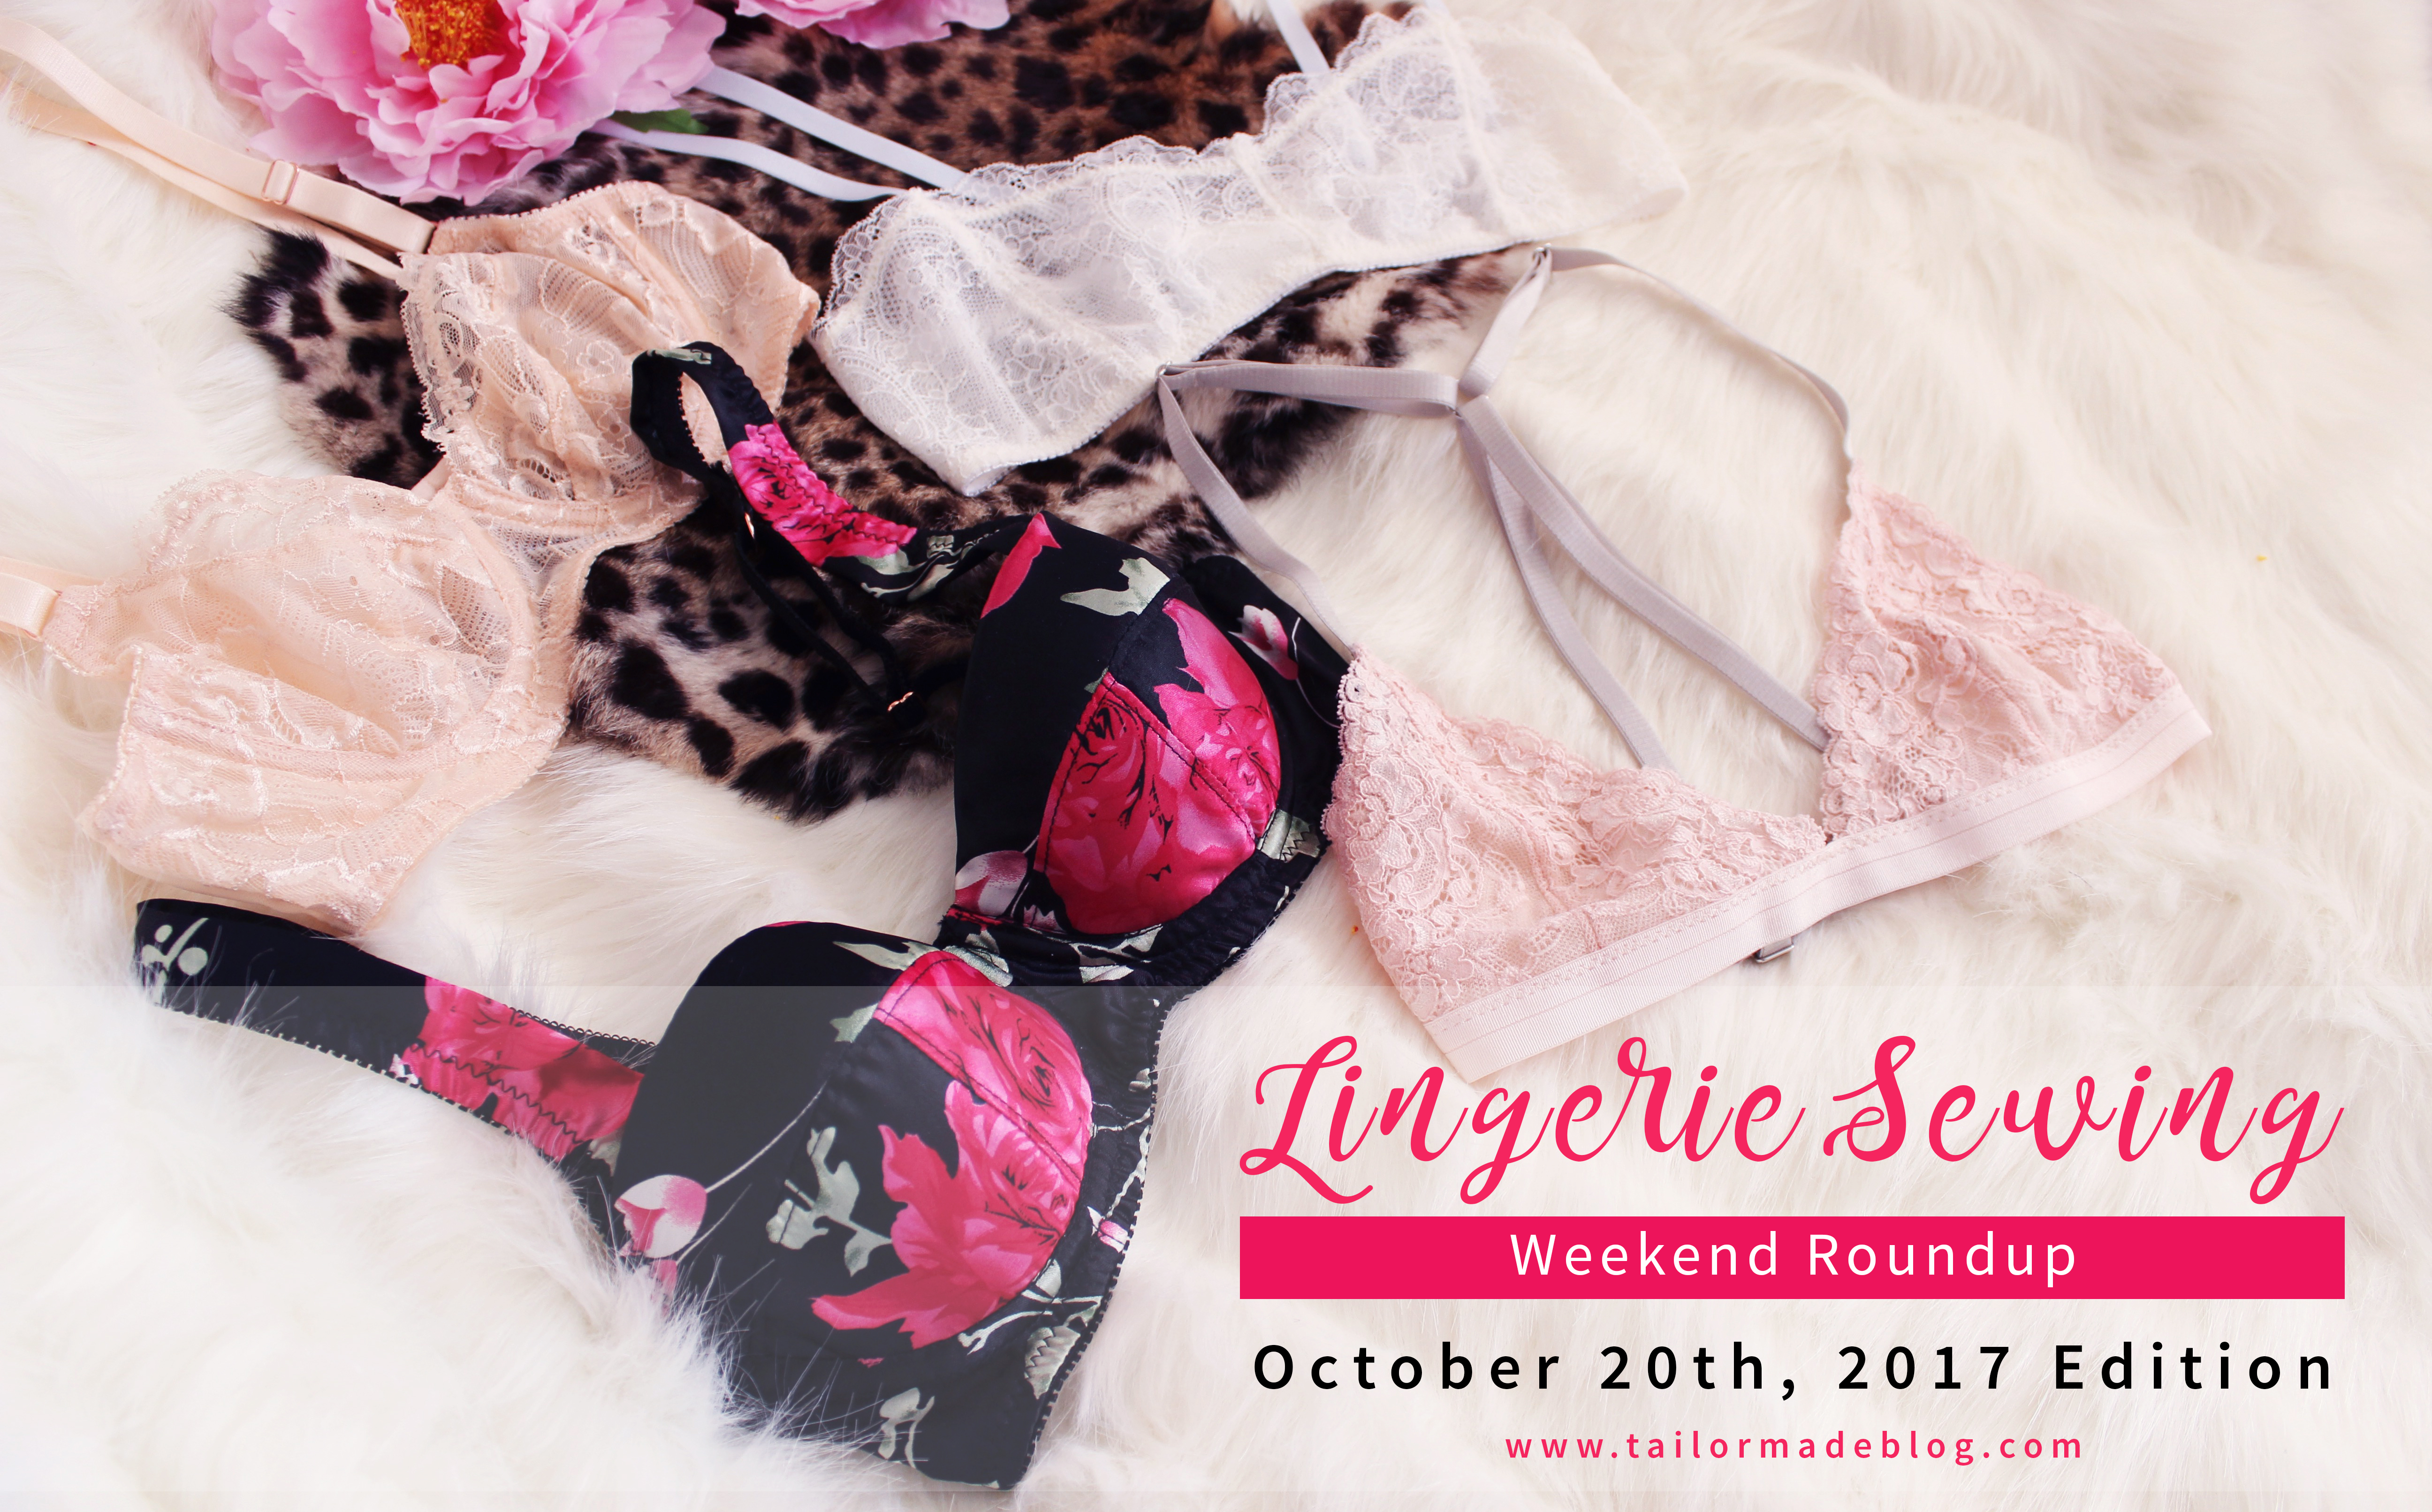 October 20th 2017 Lingerie Sewing Weekend Round Up Latest news and makes and sewing projects from the lingerie sewing bra making community